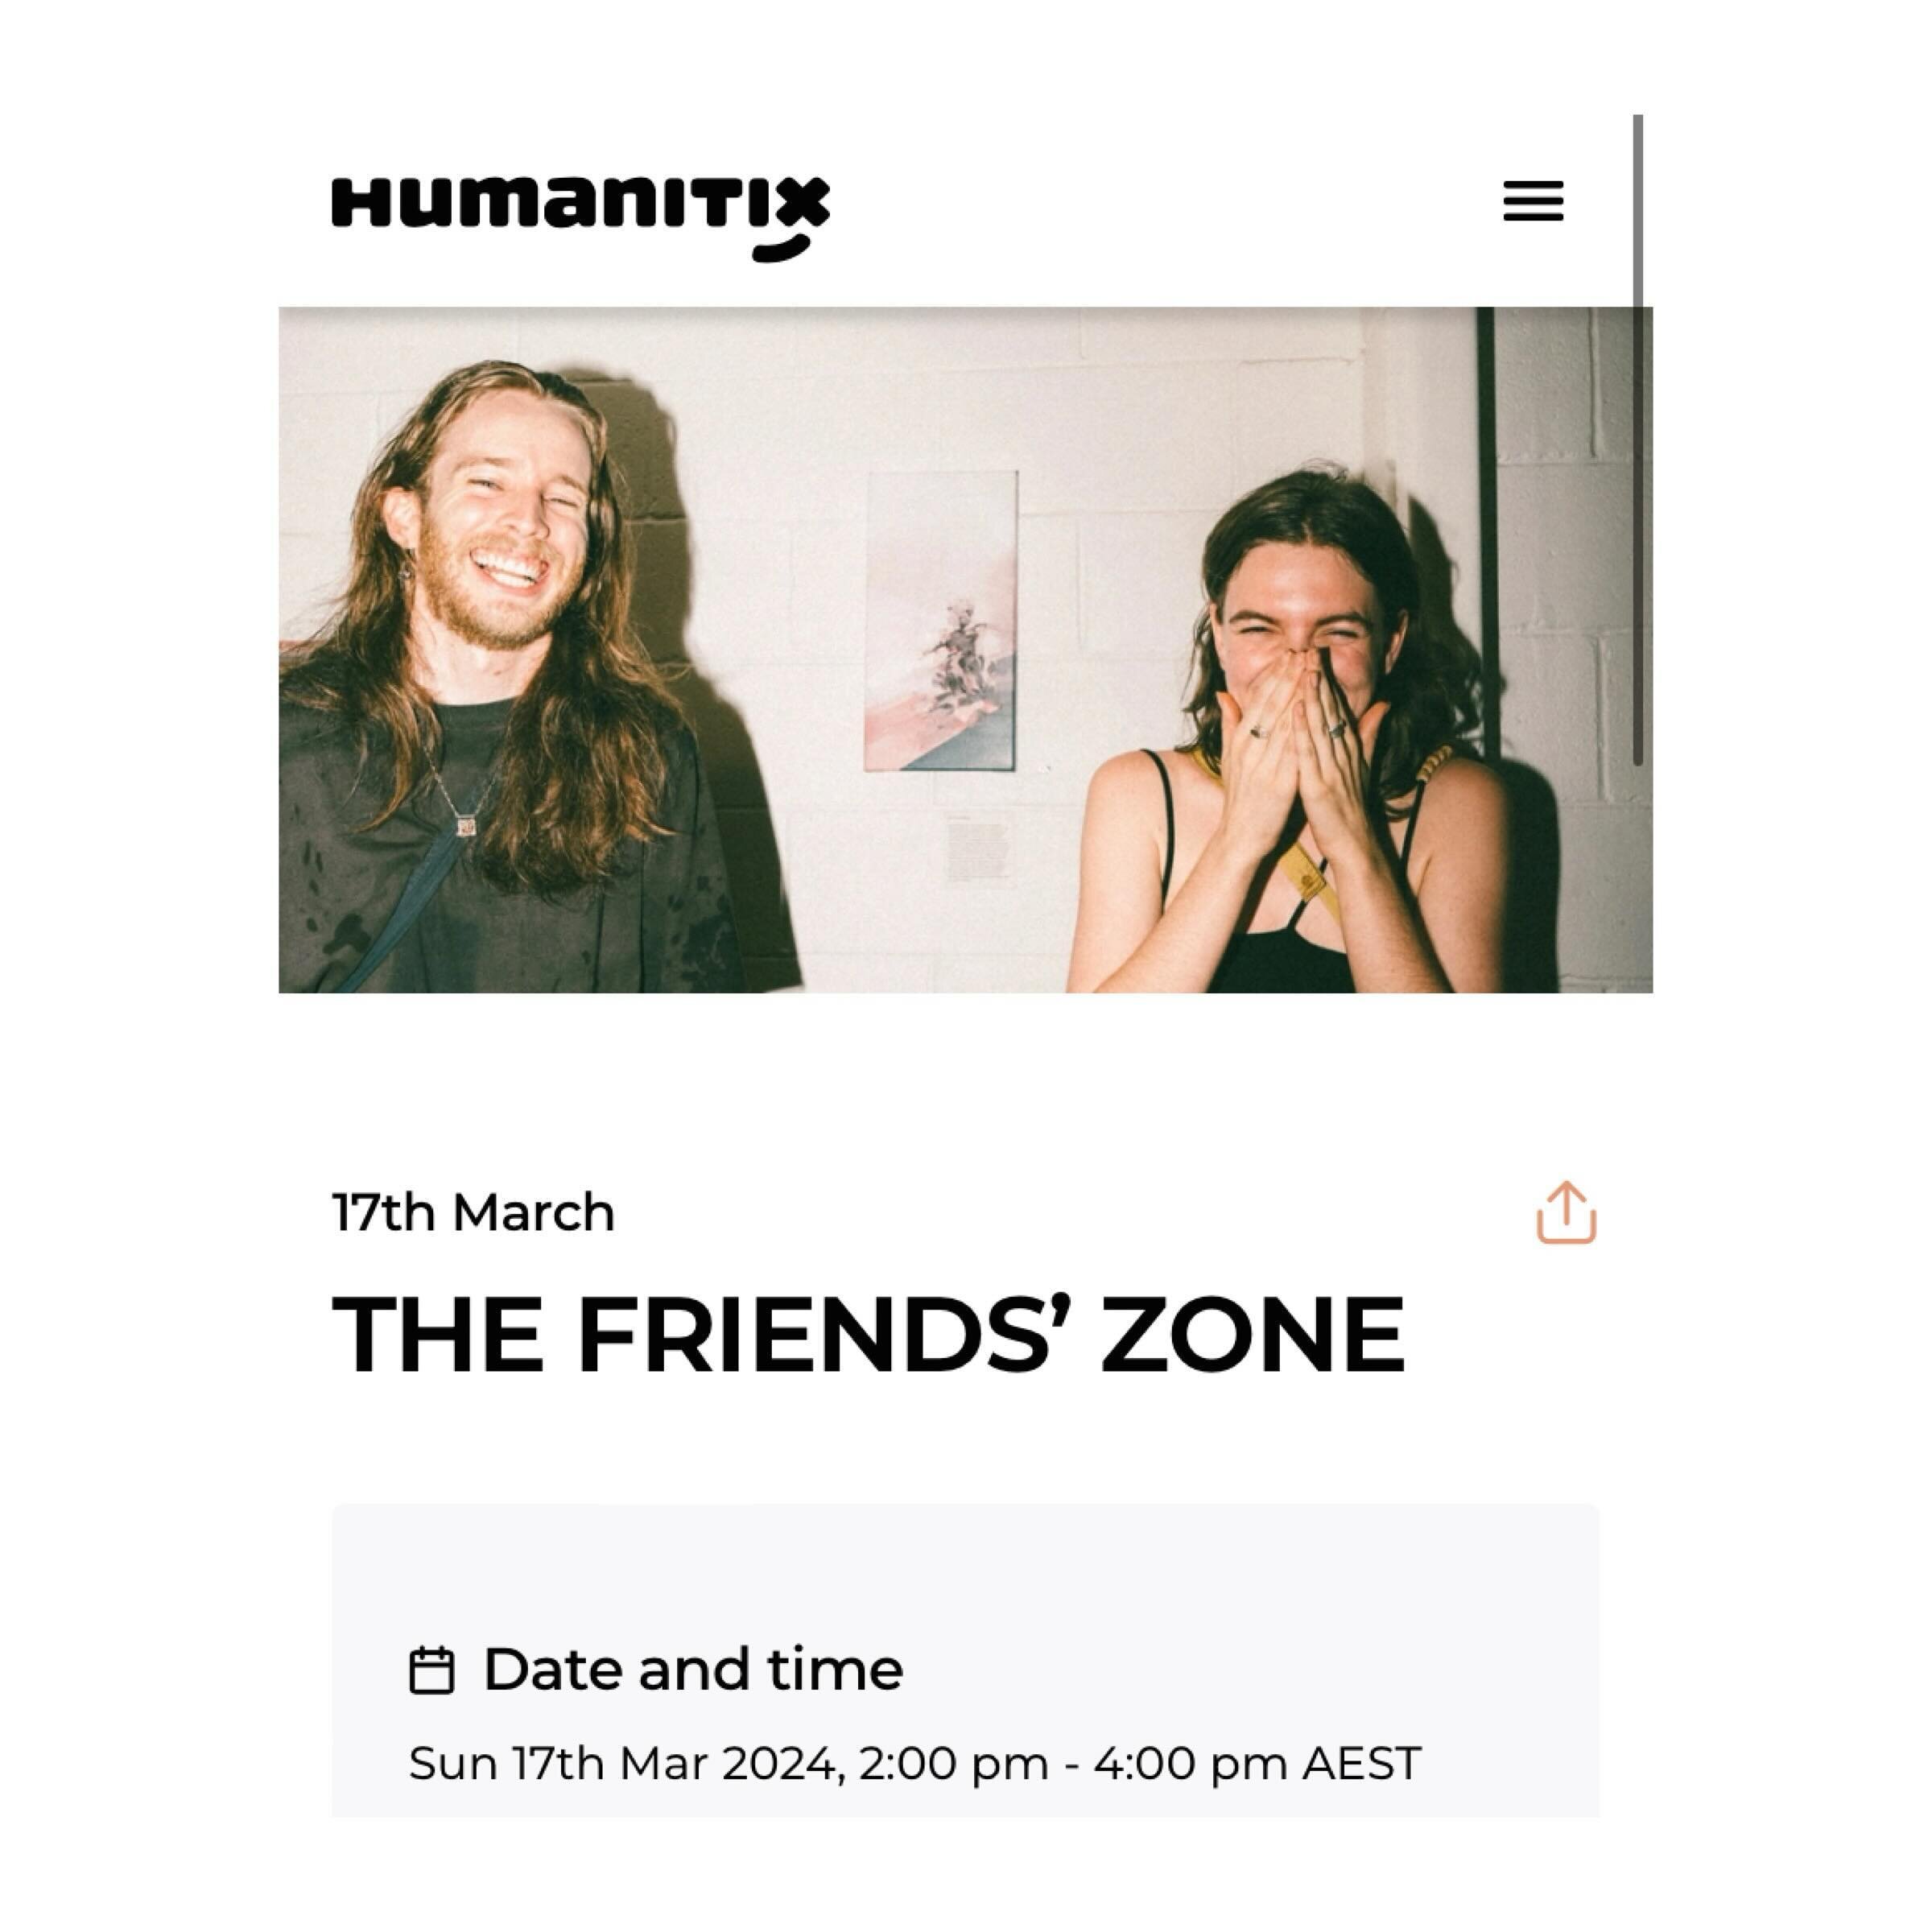 If u keen for something different????👀👀👀👀
😆
Push is hosting THE FRIENDS&rsquo; ZONE
2-4 sun 17th - $15 tix at door or on @humanitix 
Light Facilitated Mingling- 
Think speed dating, but for friendship.

Your social navigation hosts, Zac and Jen,